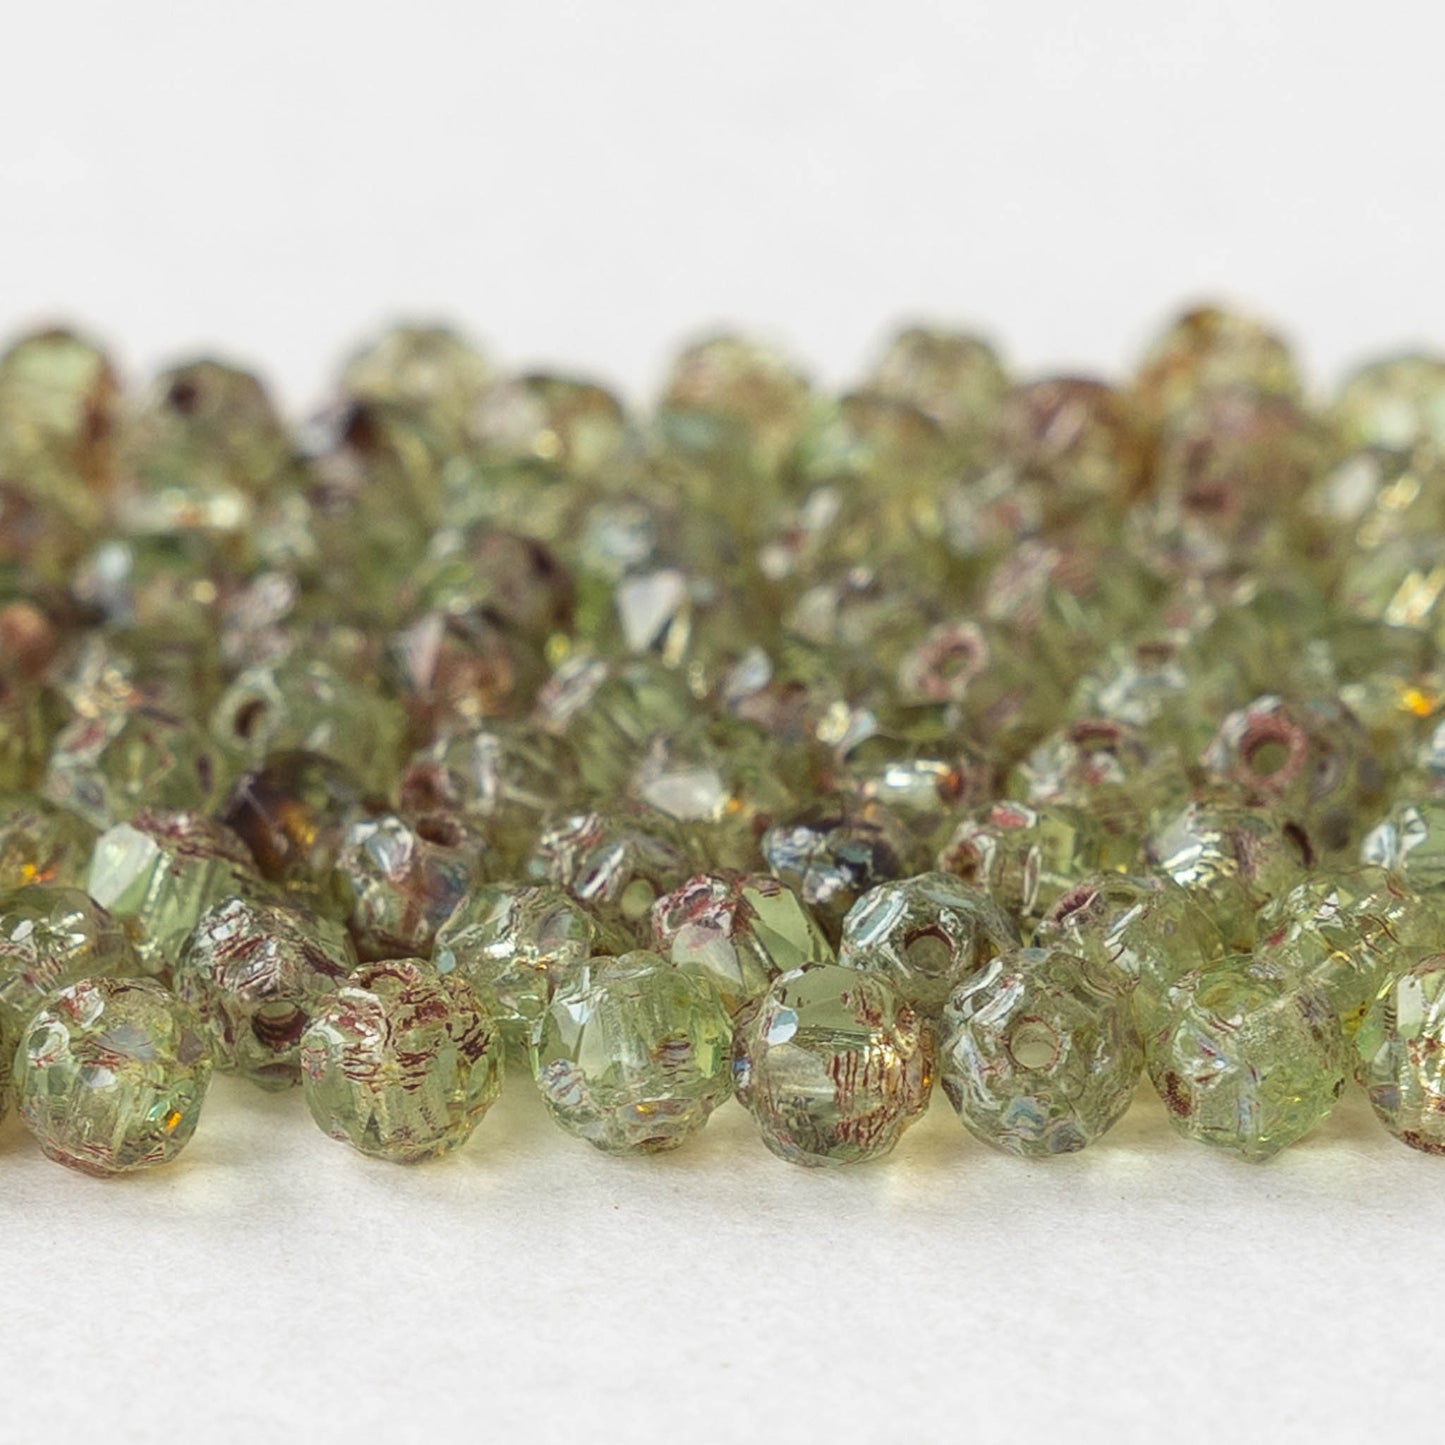 4mm Tiny Catherdal Cut Beads - Peridot Green Picasso - 120 beads